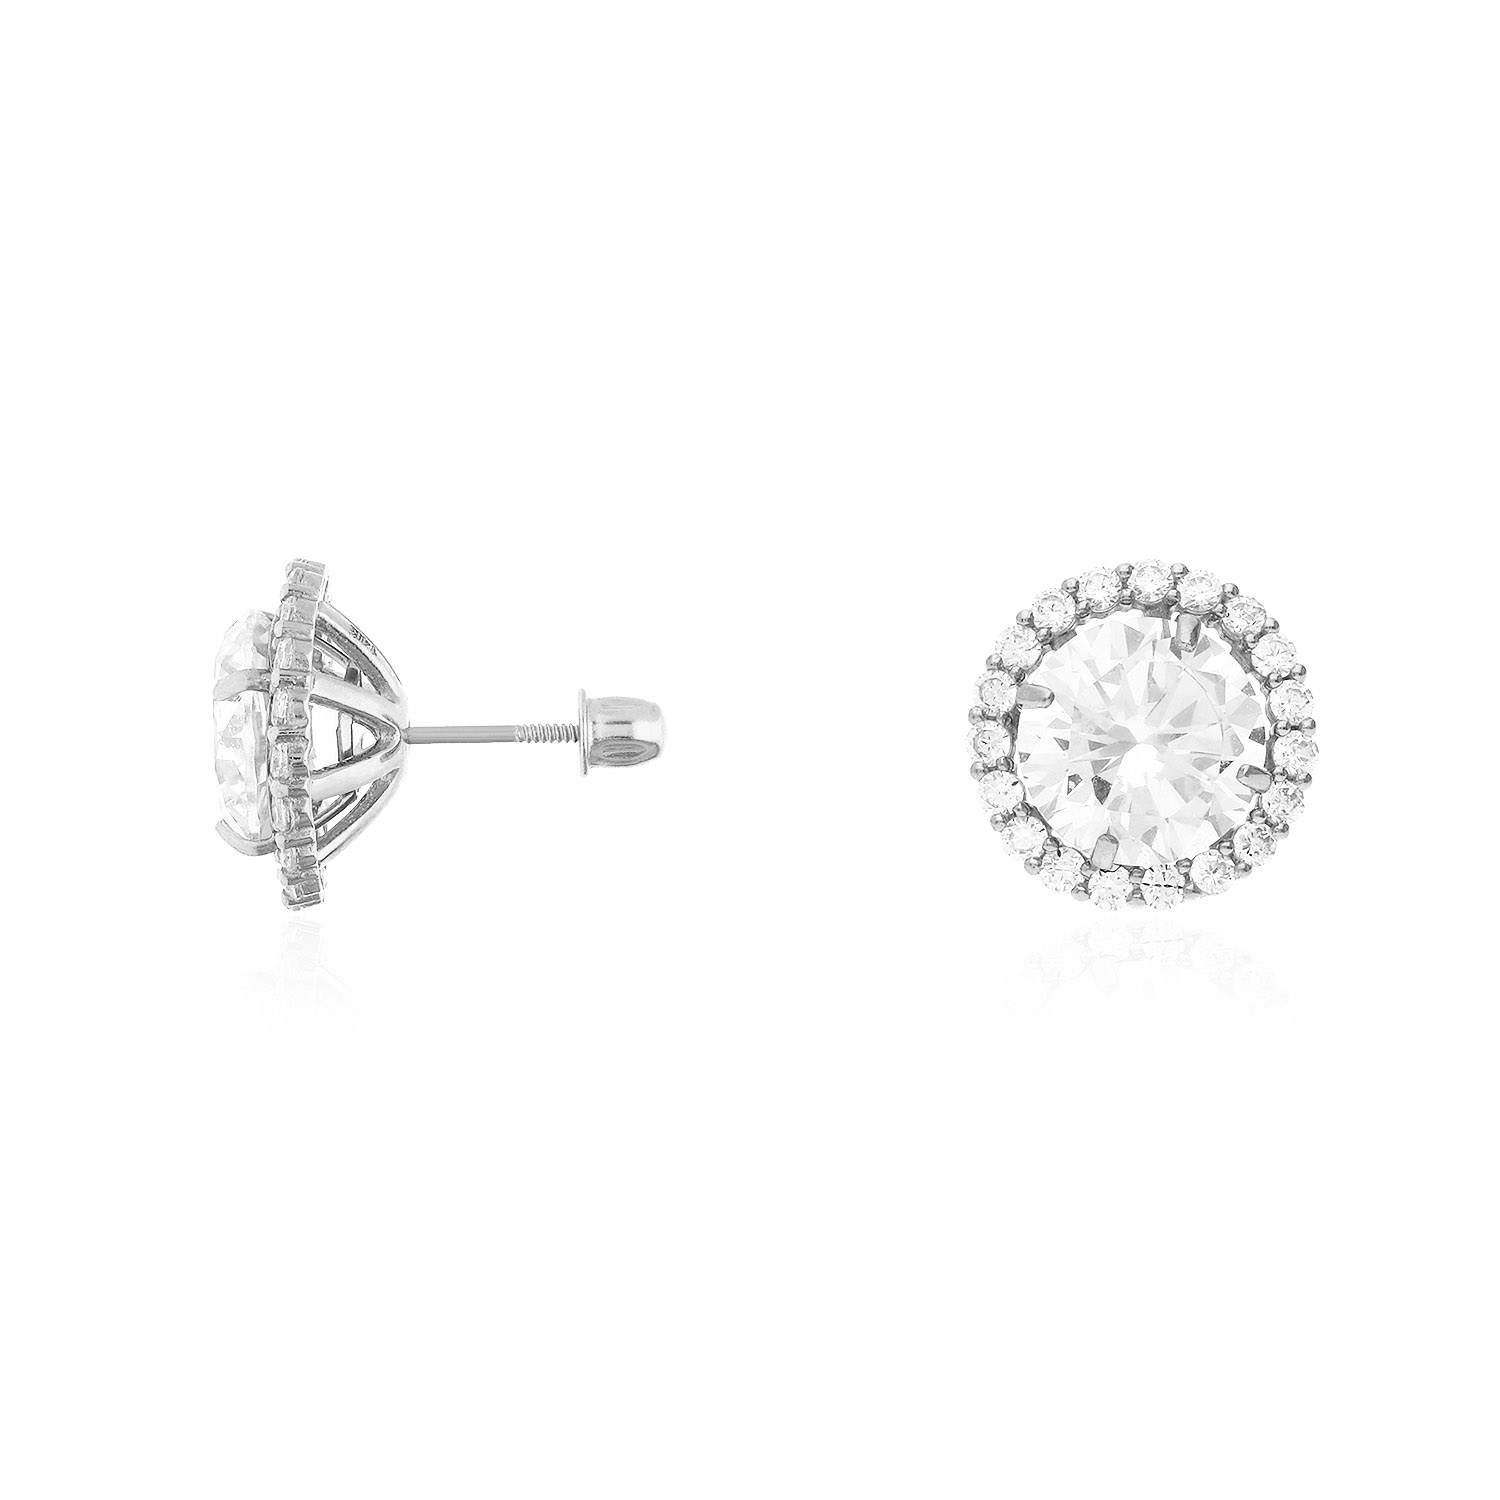 14K White Gold Created Diamond Halo Earring Jackets And Studs - image 1 of 5